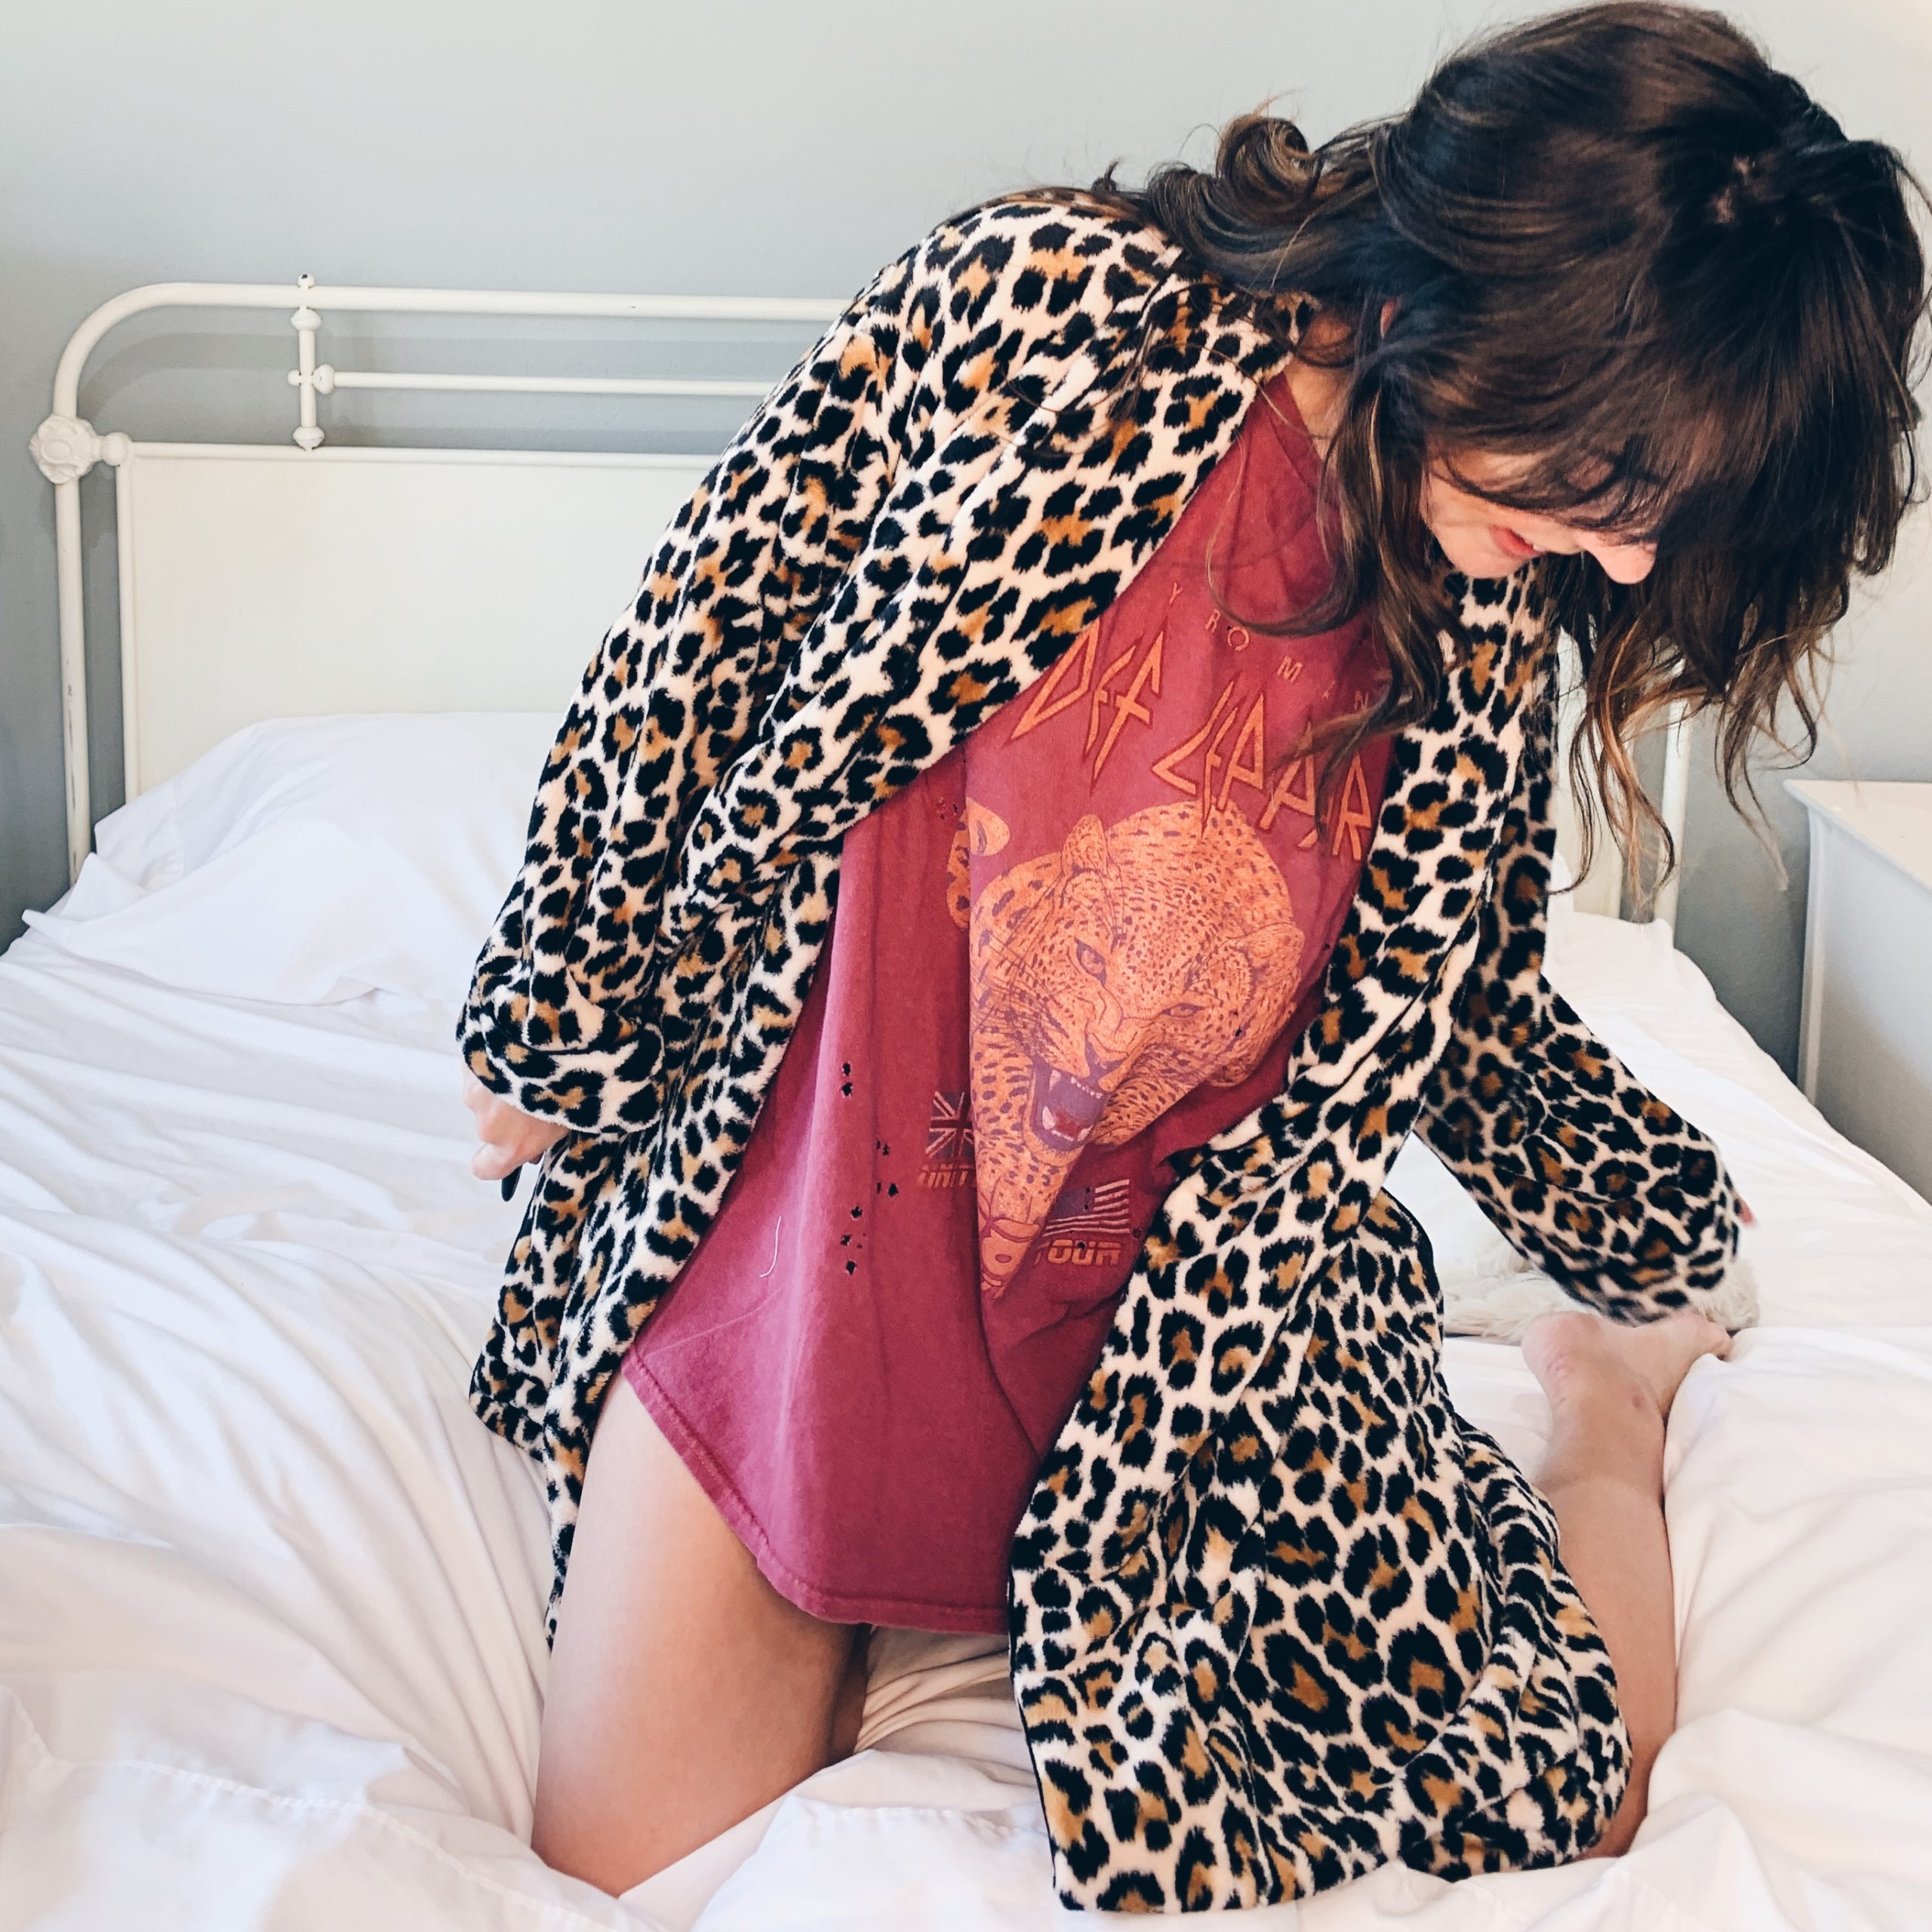 Pajama Party | New PJ’s Will Change Your Life